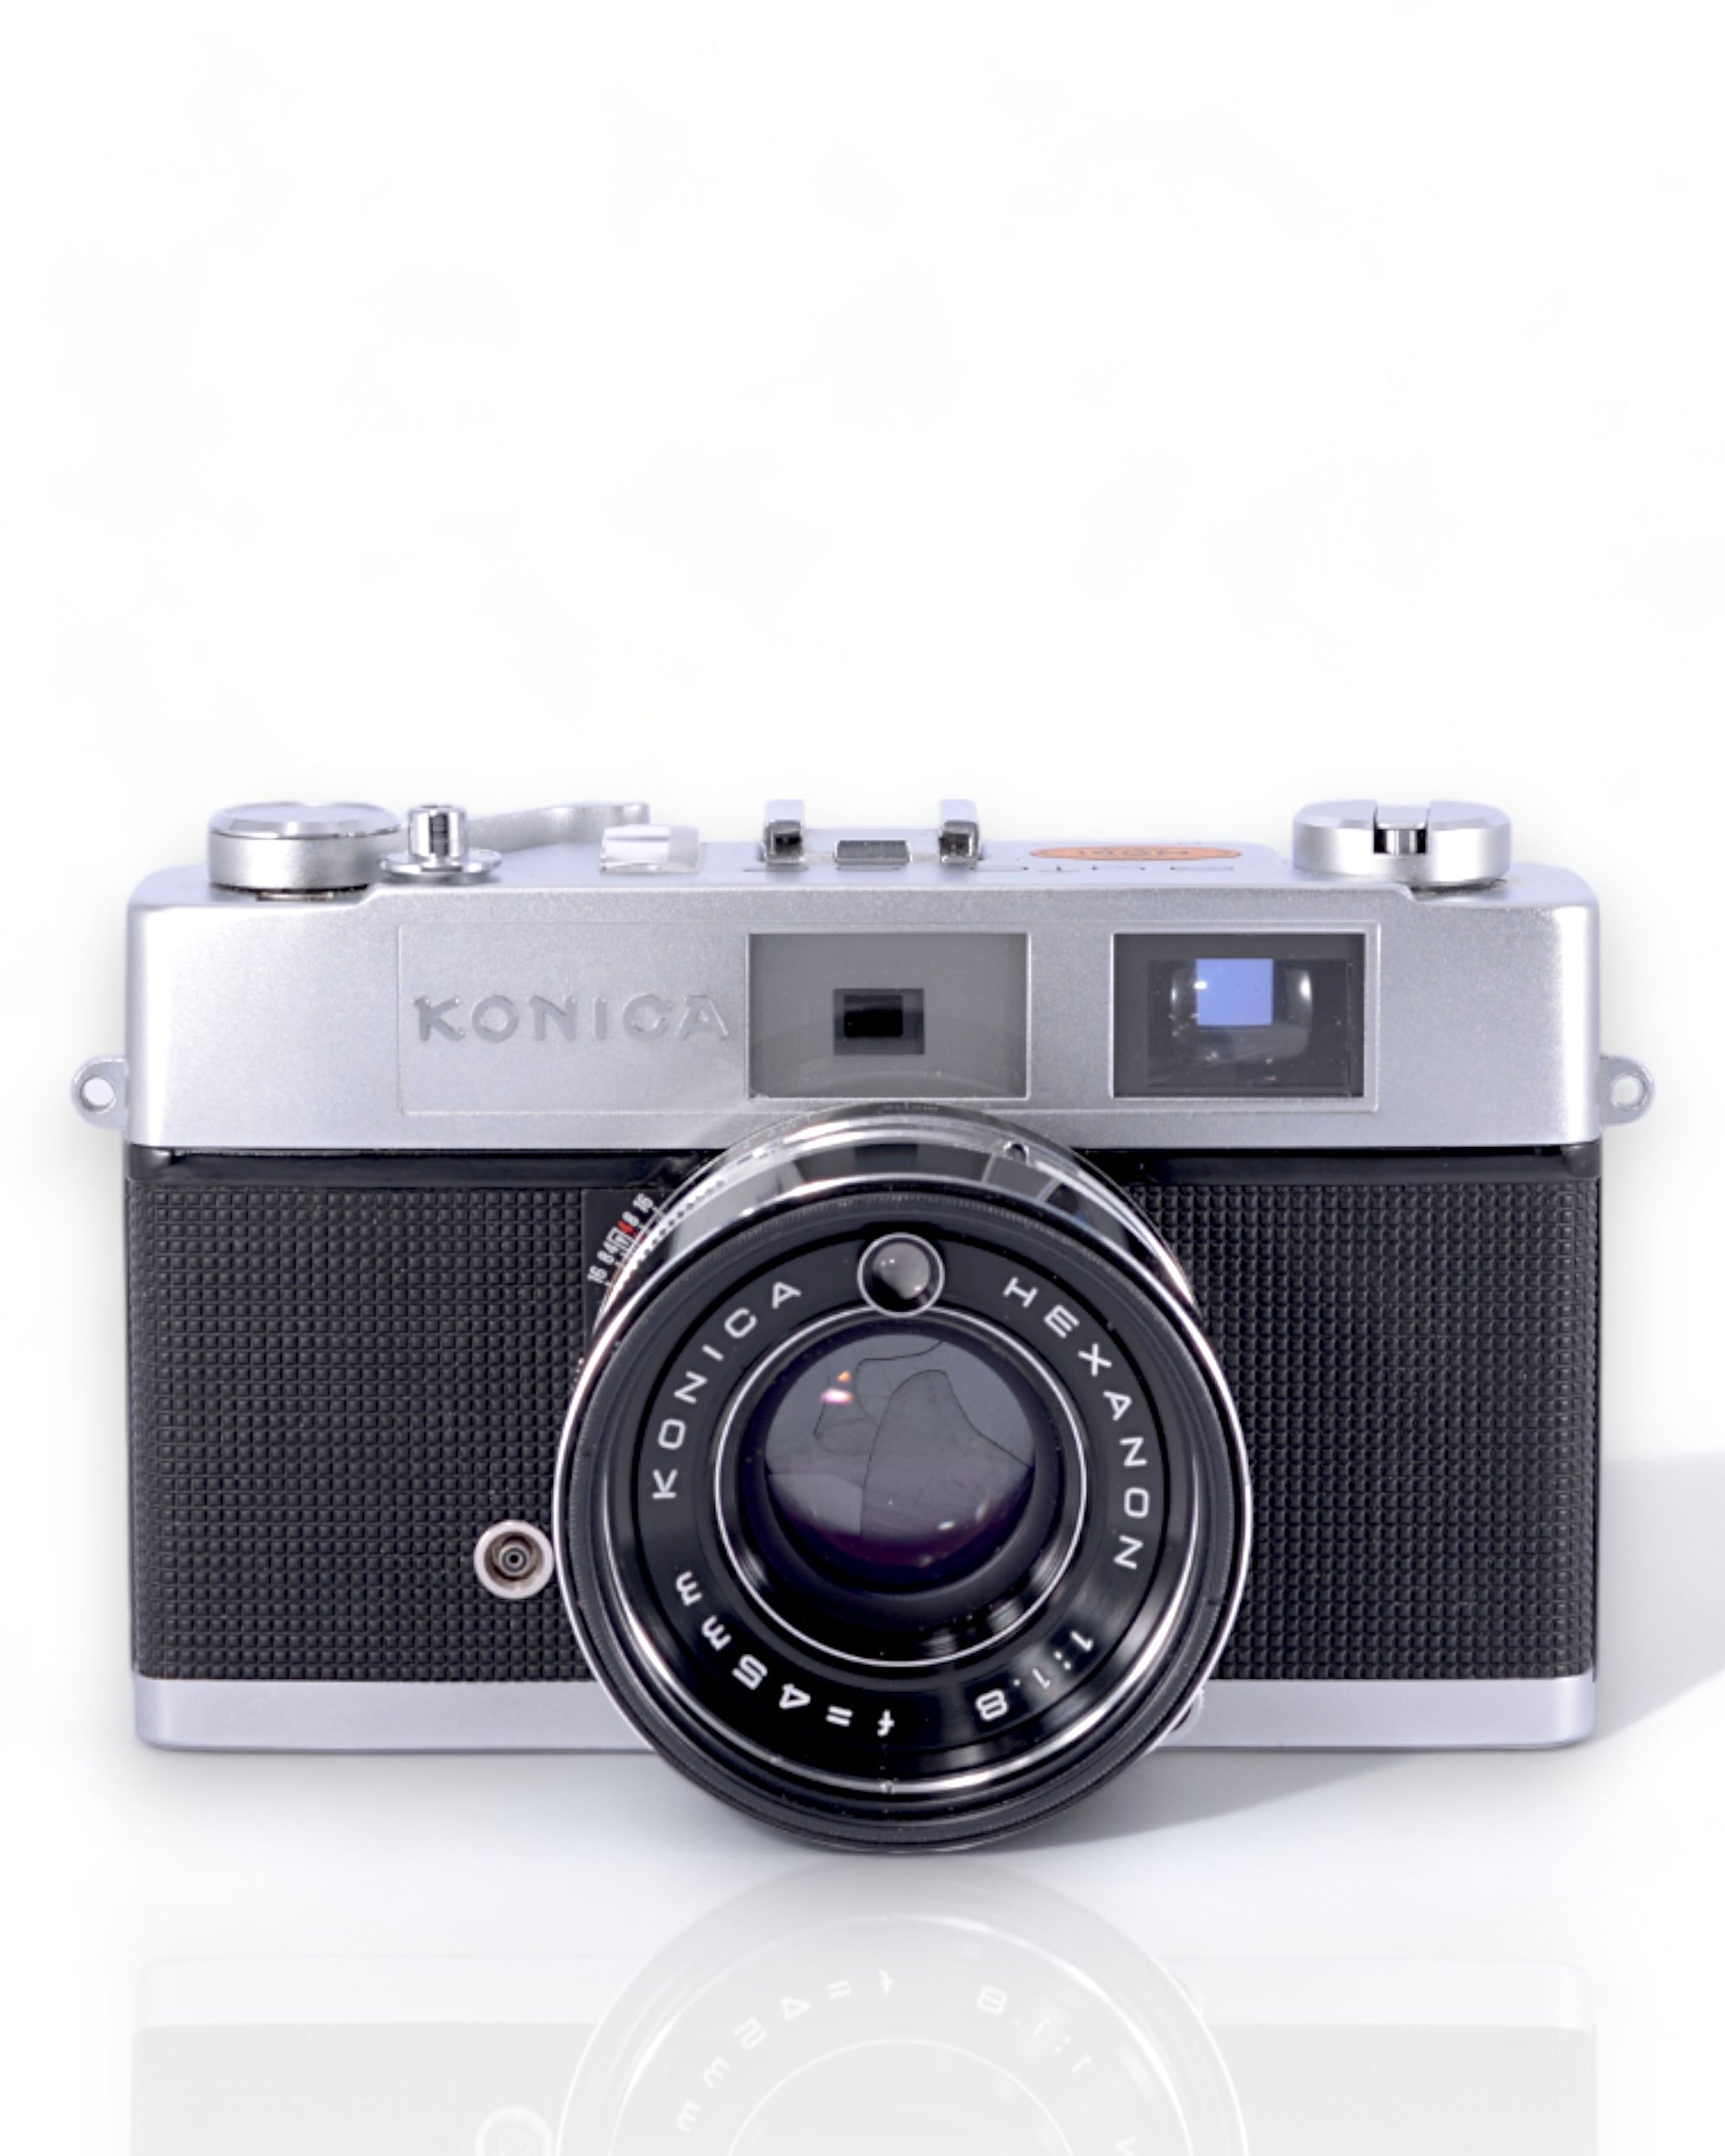 Konica Auto S2 35mm Rangefinder film camera with 45mm f1.8 lens